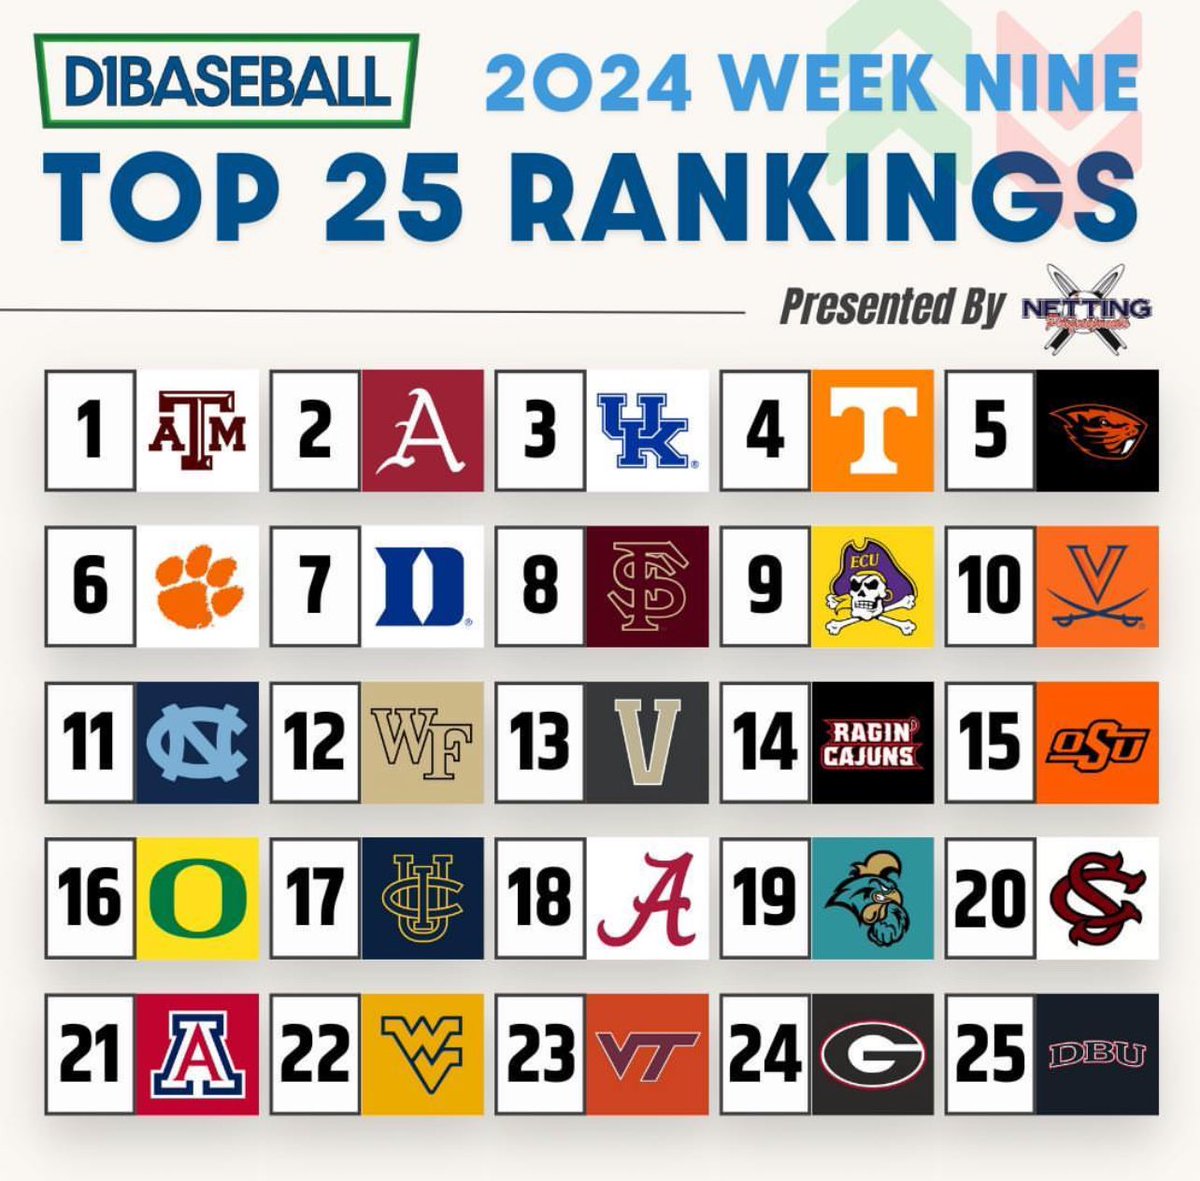 Week 9 Top 25 from @d1baseball! South Carolina, Arizona, West Virginia, and Georgia join the rankings this week. UCF, Mississippi State, Nebraska and Florida drop out of the Top 25 Texas A&M takes over at #1!